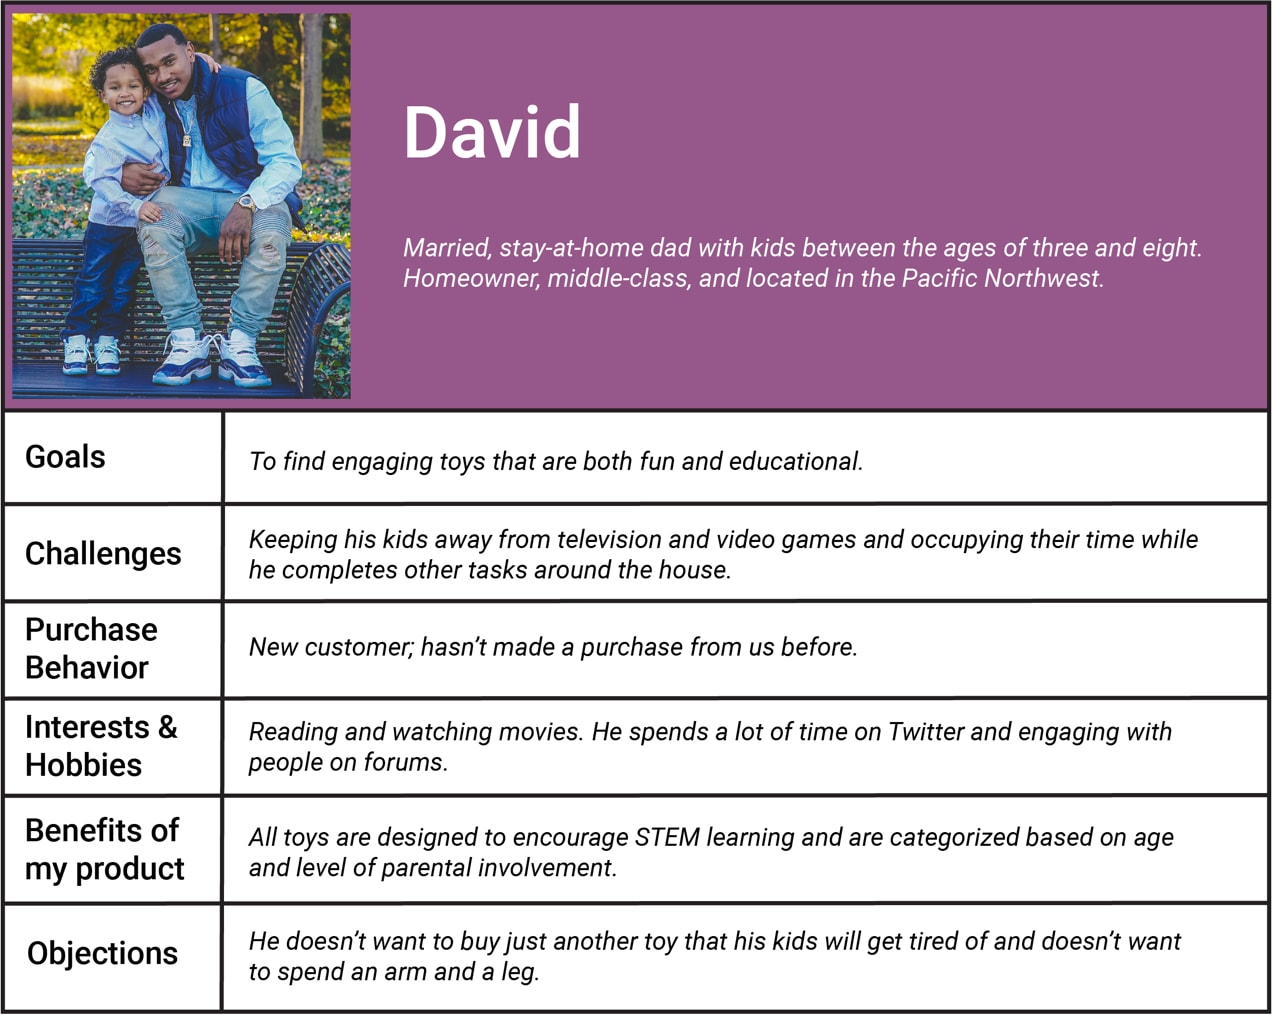 buyer persona for David, with goals, challenges, and more